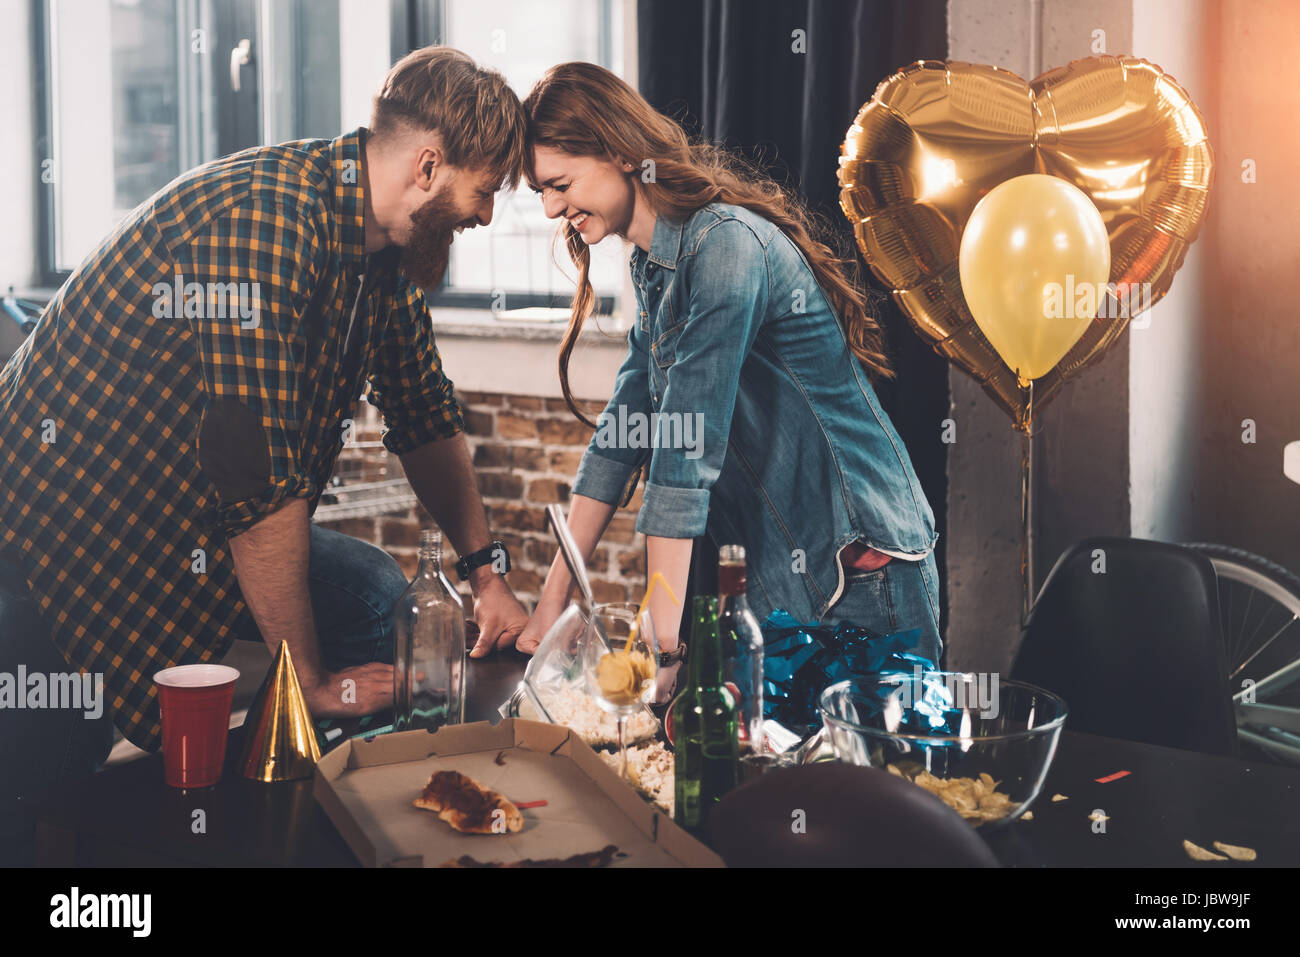 man and woman cleaning messy room after party Stock Photo